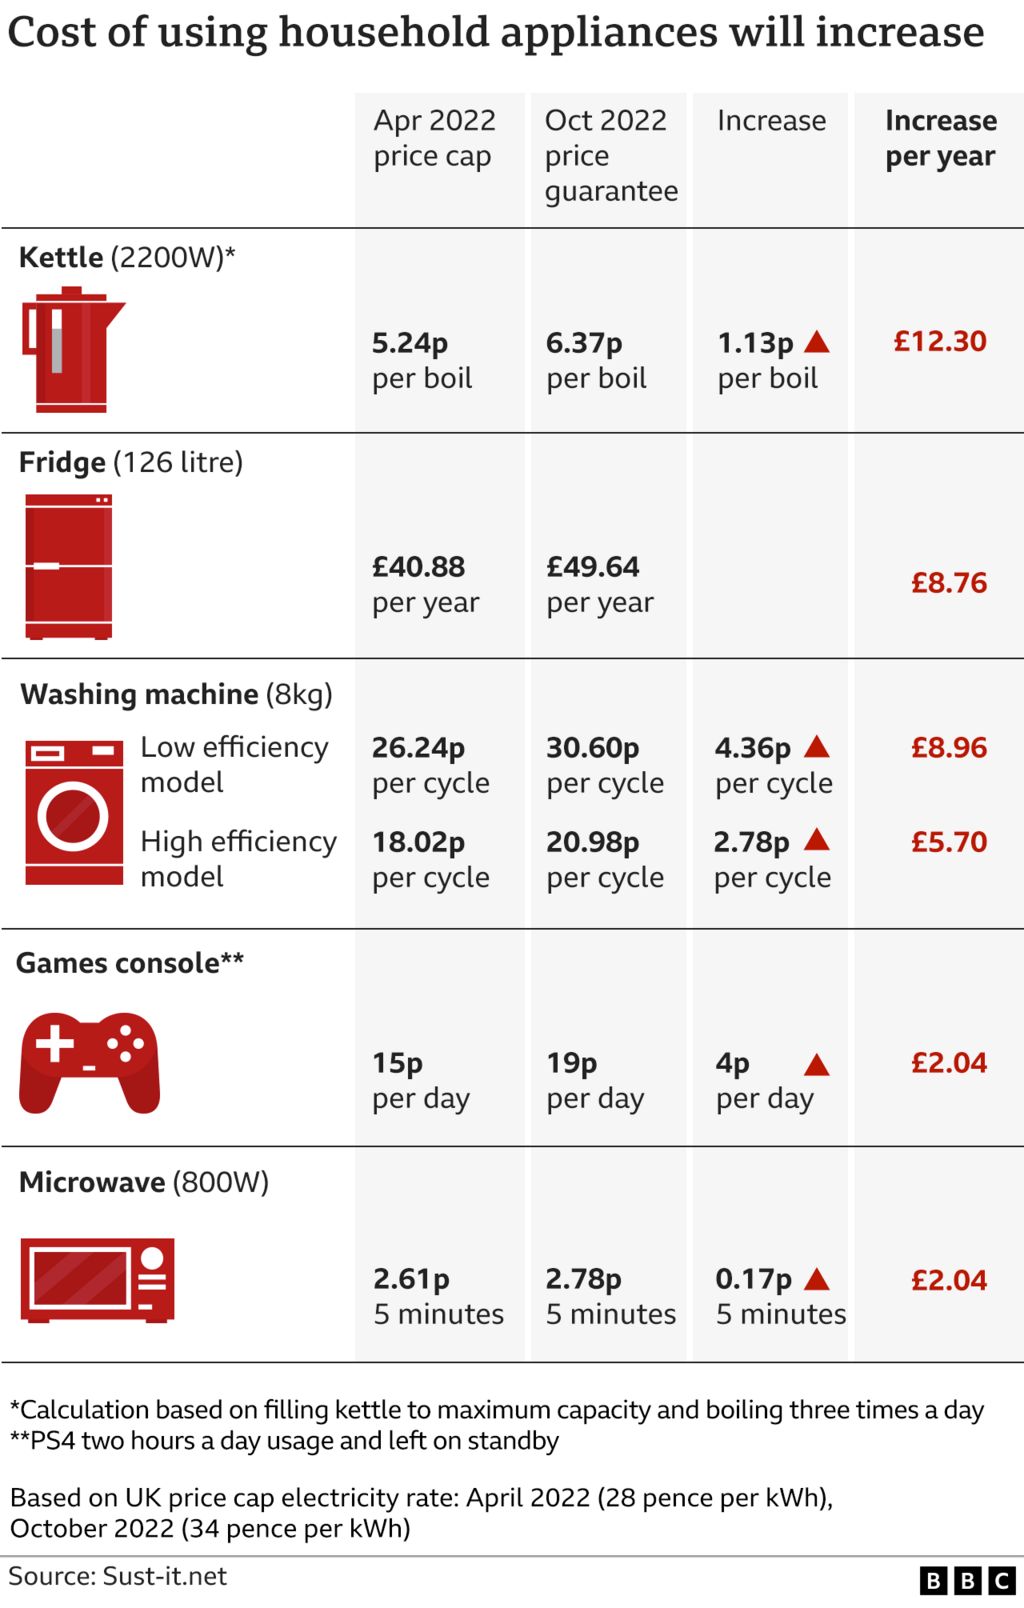 Graphic showing cost of using household appliances